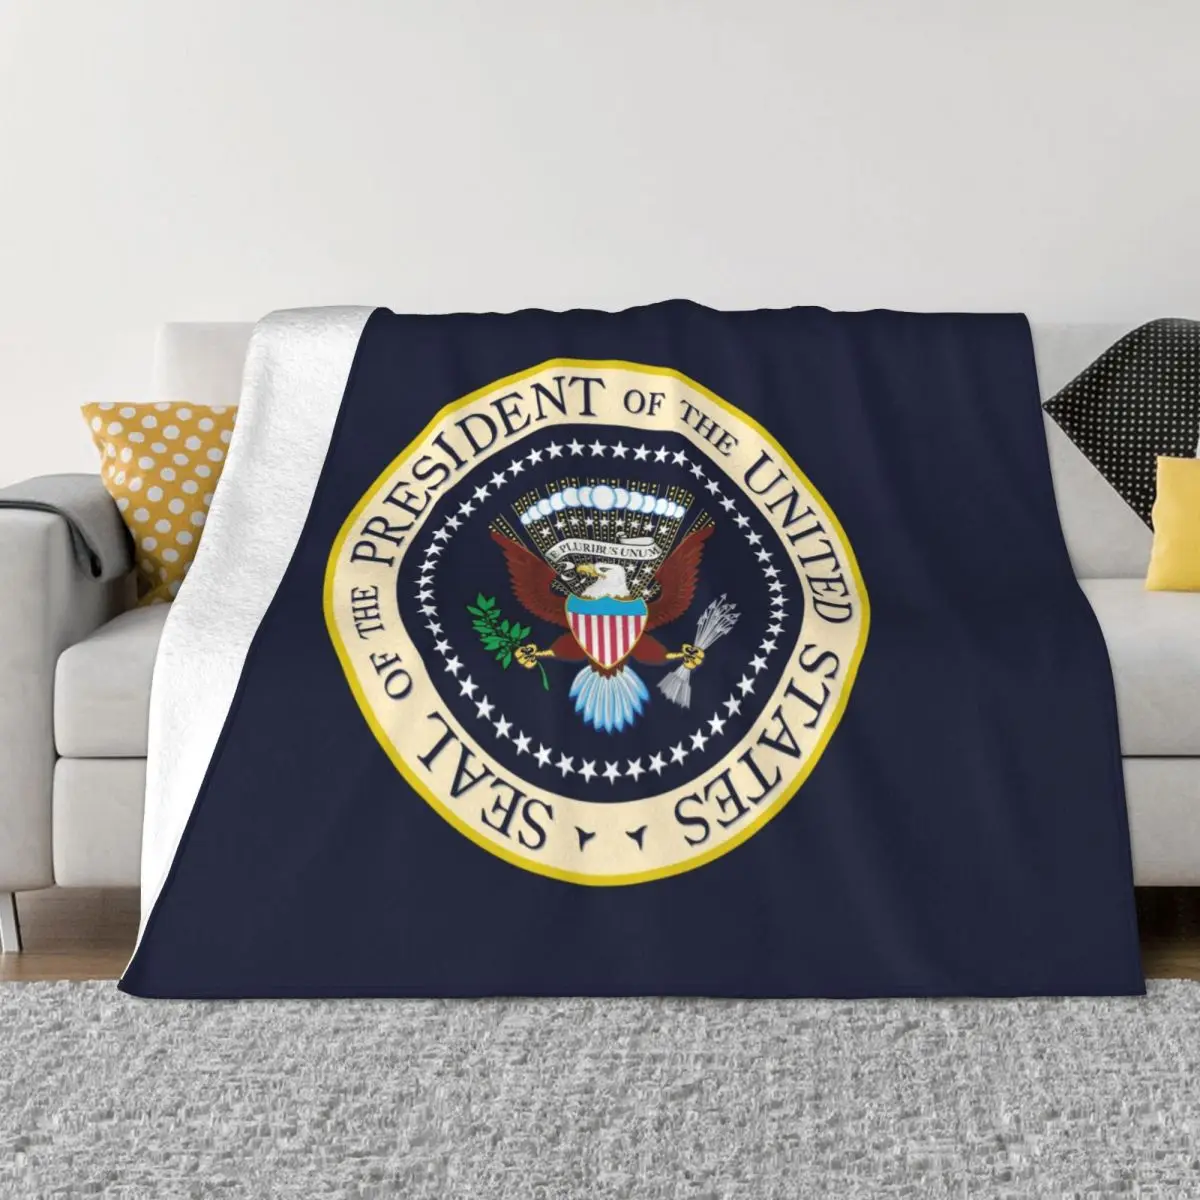 

USA President Seal Blanket President Election Vote Donald Trump Wool Throw Blankets Airplane Travel Ultra-Soft Warm Bedspreads